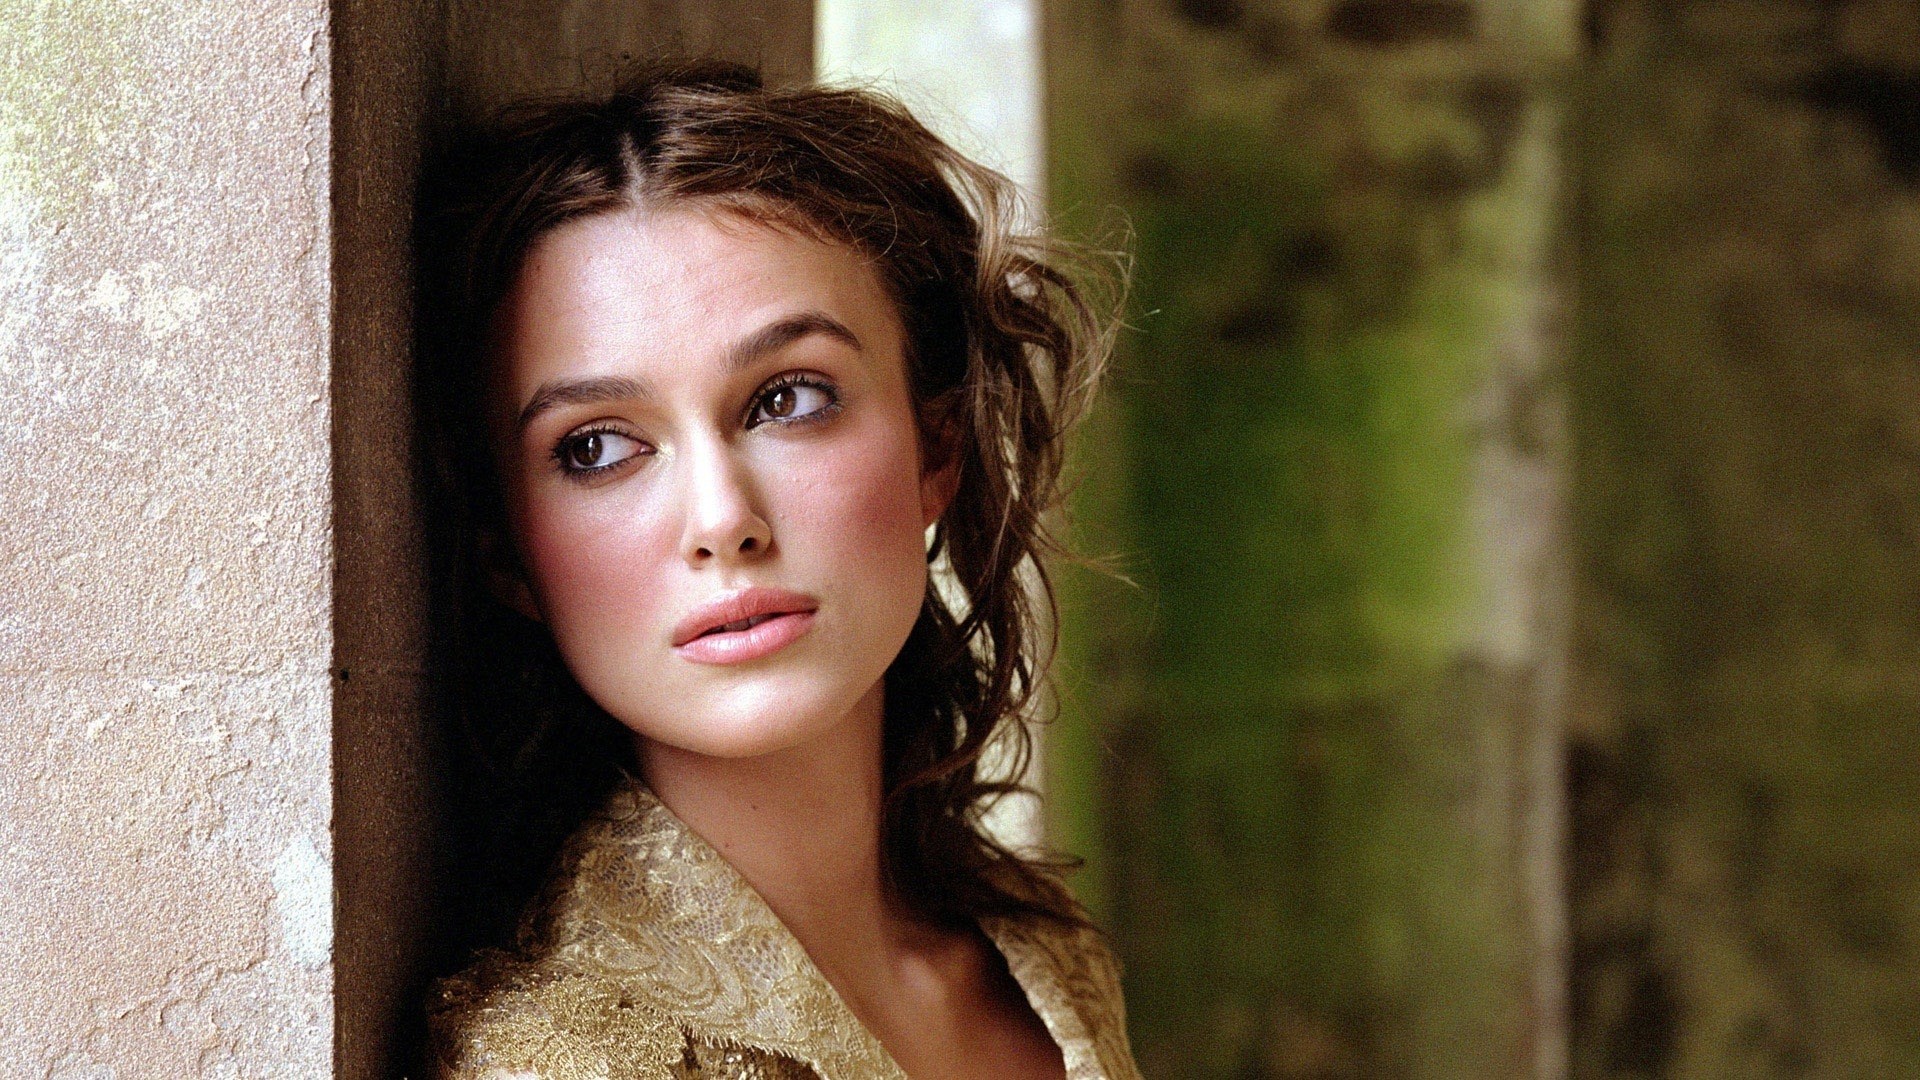 People 1920x1080 Keira Knightley women actress celebrity face looking into the distance